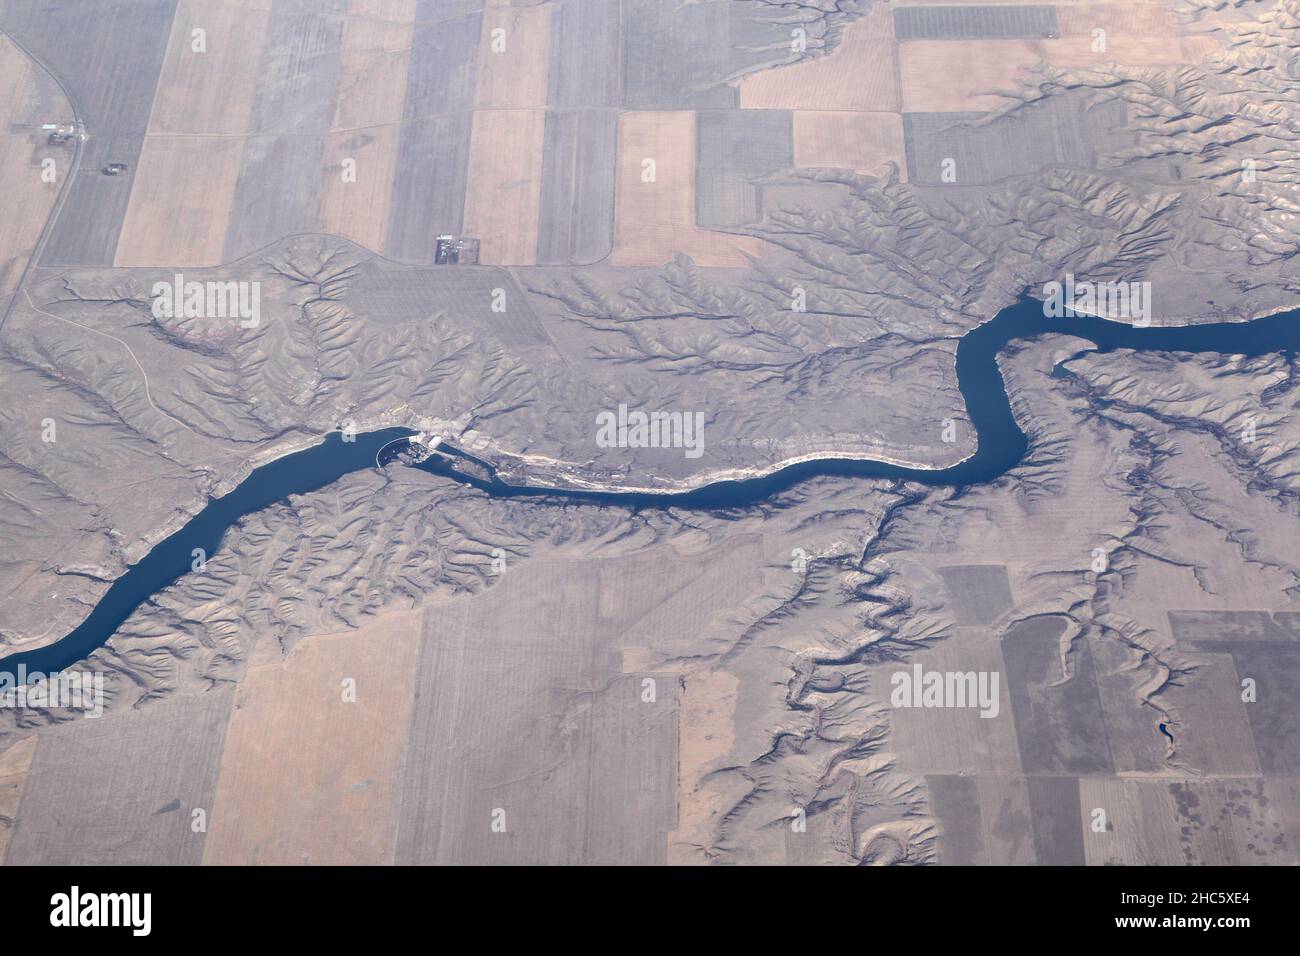 The Earth from above: Ryan Dam on the Missouri River in Montana. Stock Photo